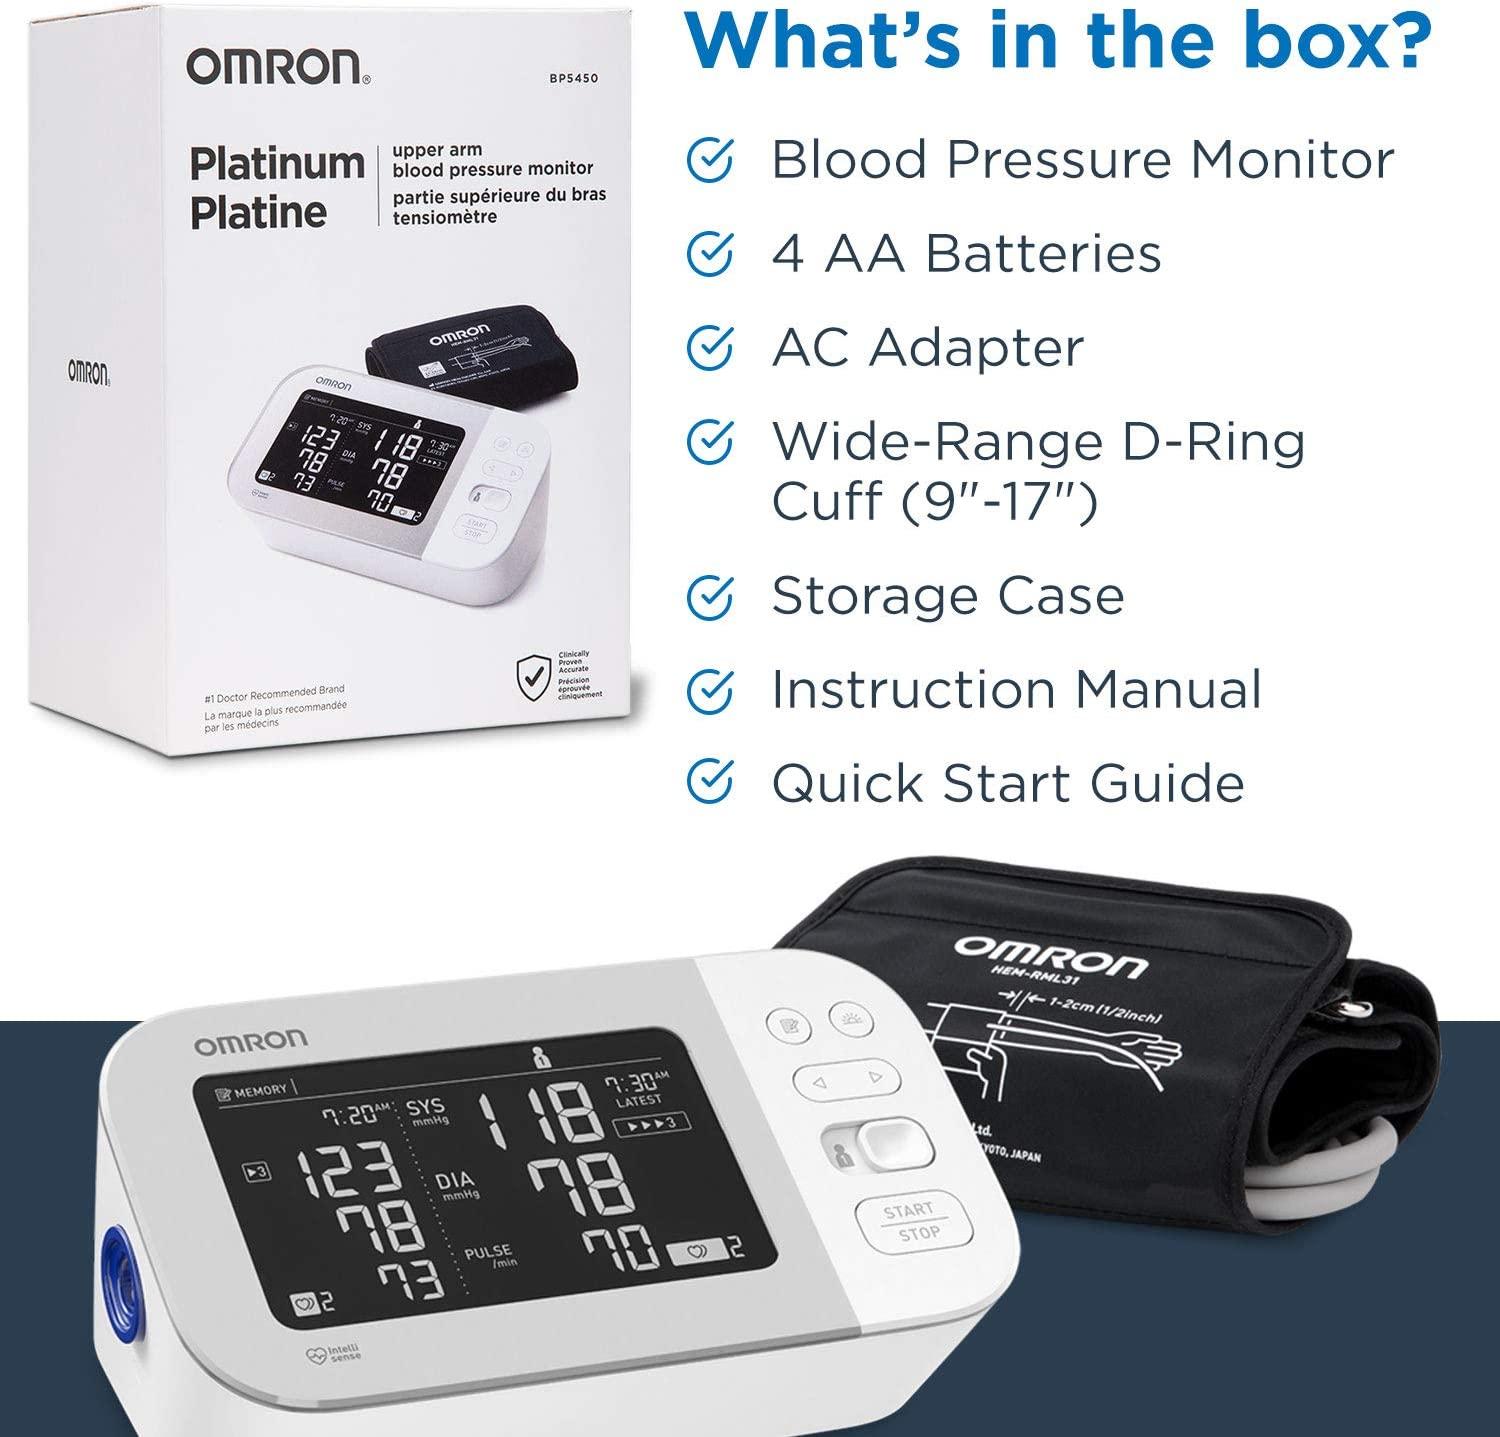 Philips Connected Blood Pressure Monitor – BioTelemetry, a Philips